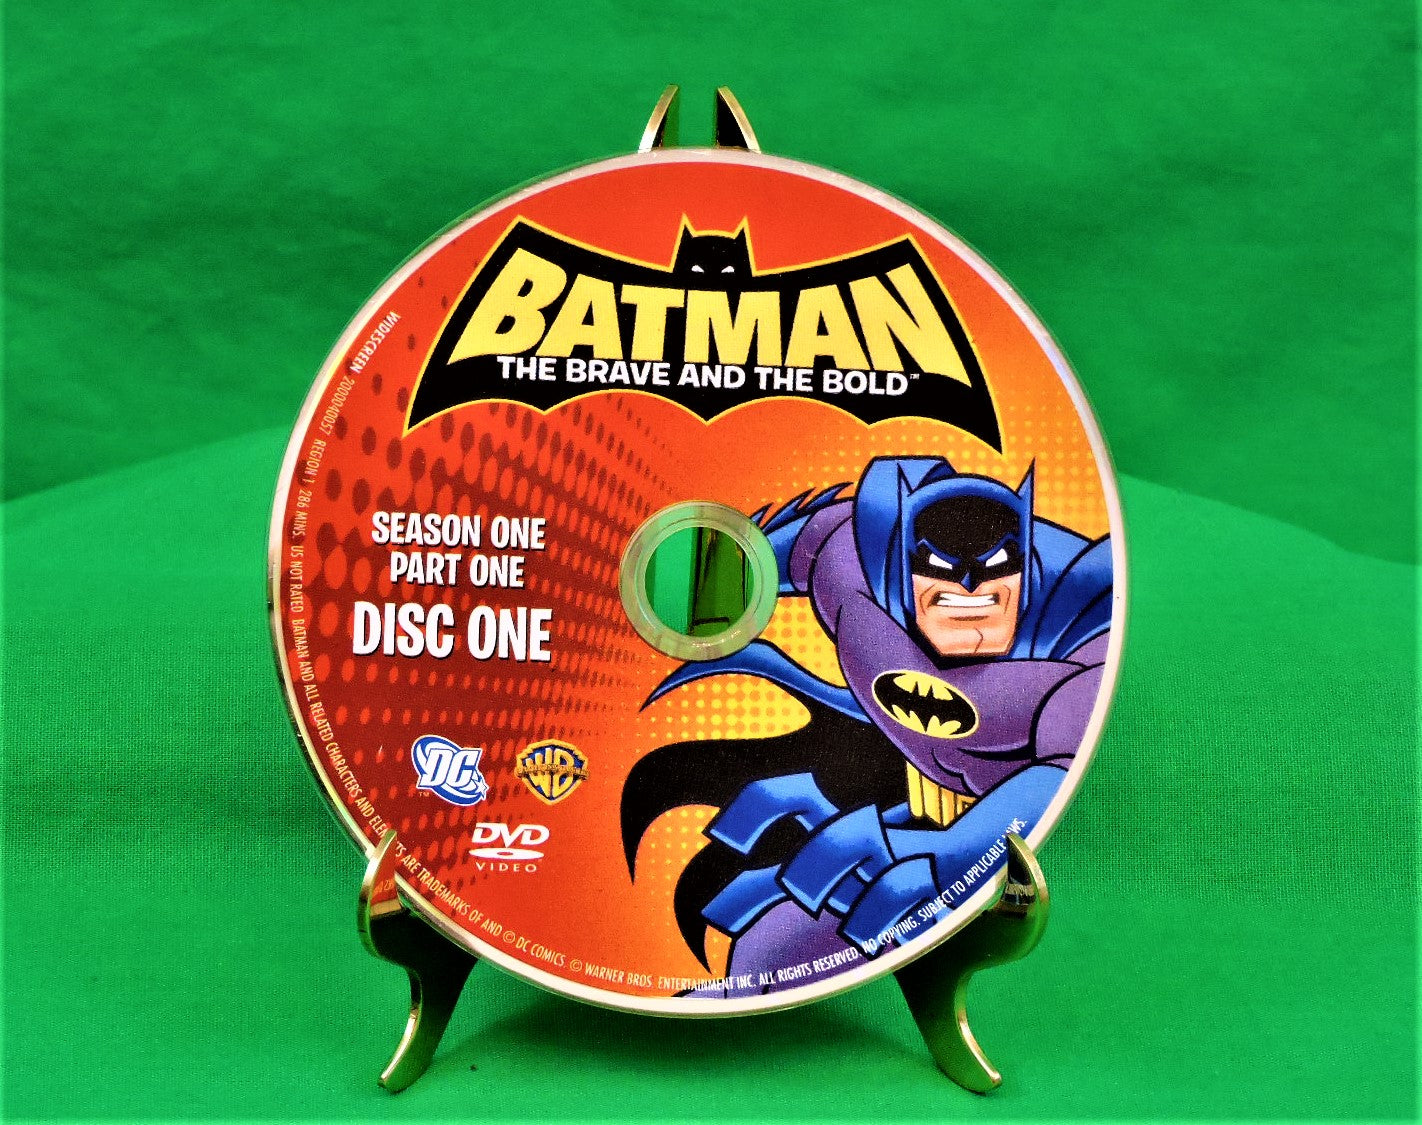 One　Disc　DVD　The　Movies　Bold　Brave　the　and　HDR　Sold　Outright　Batman　–